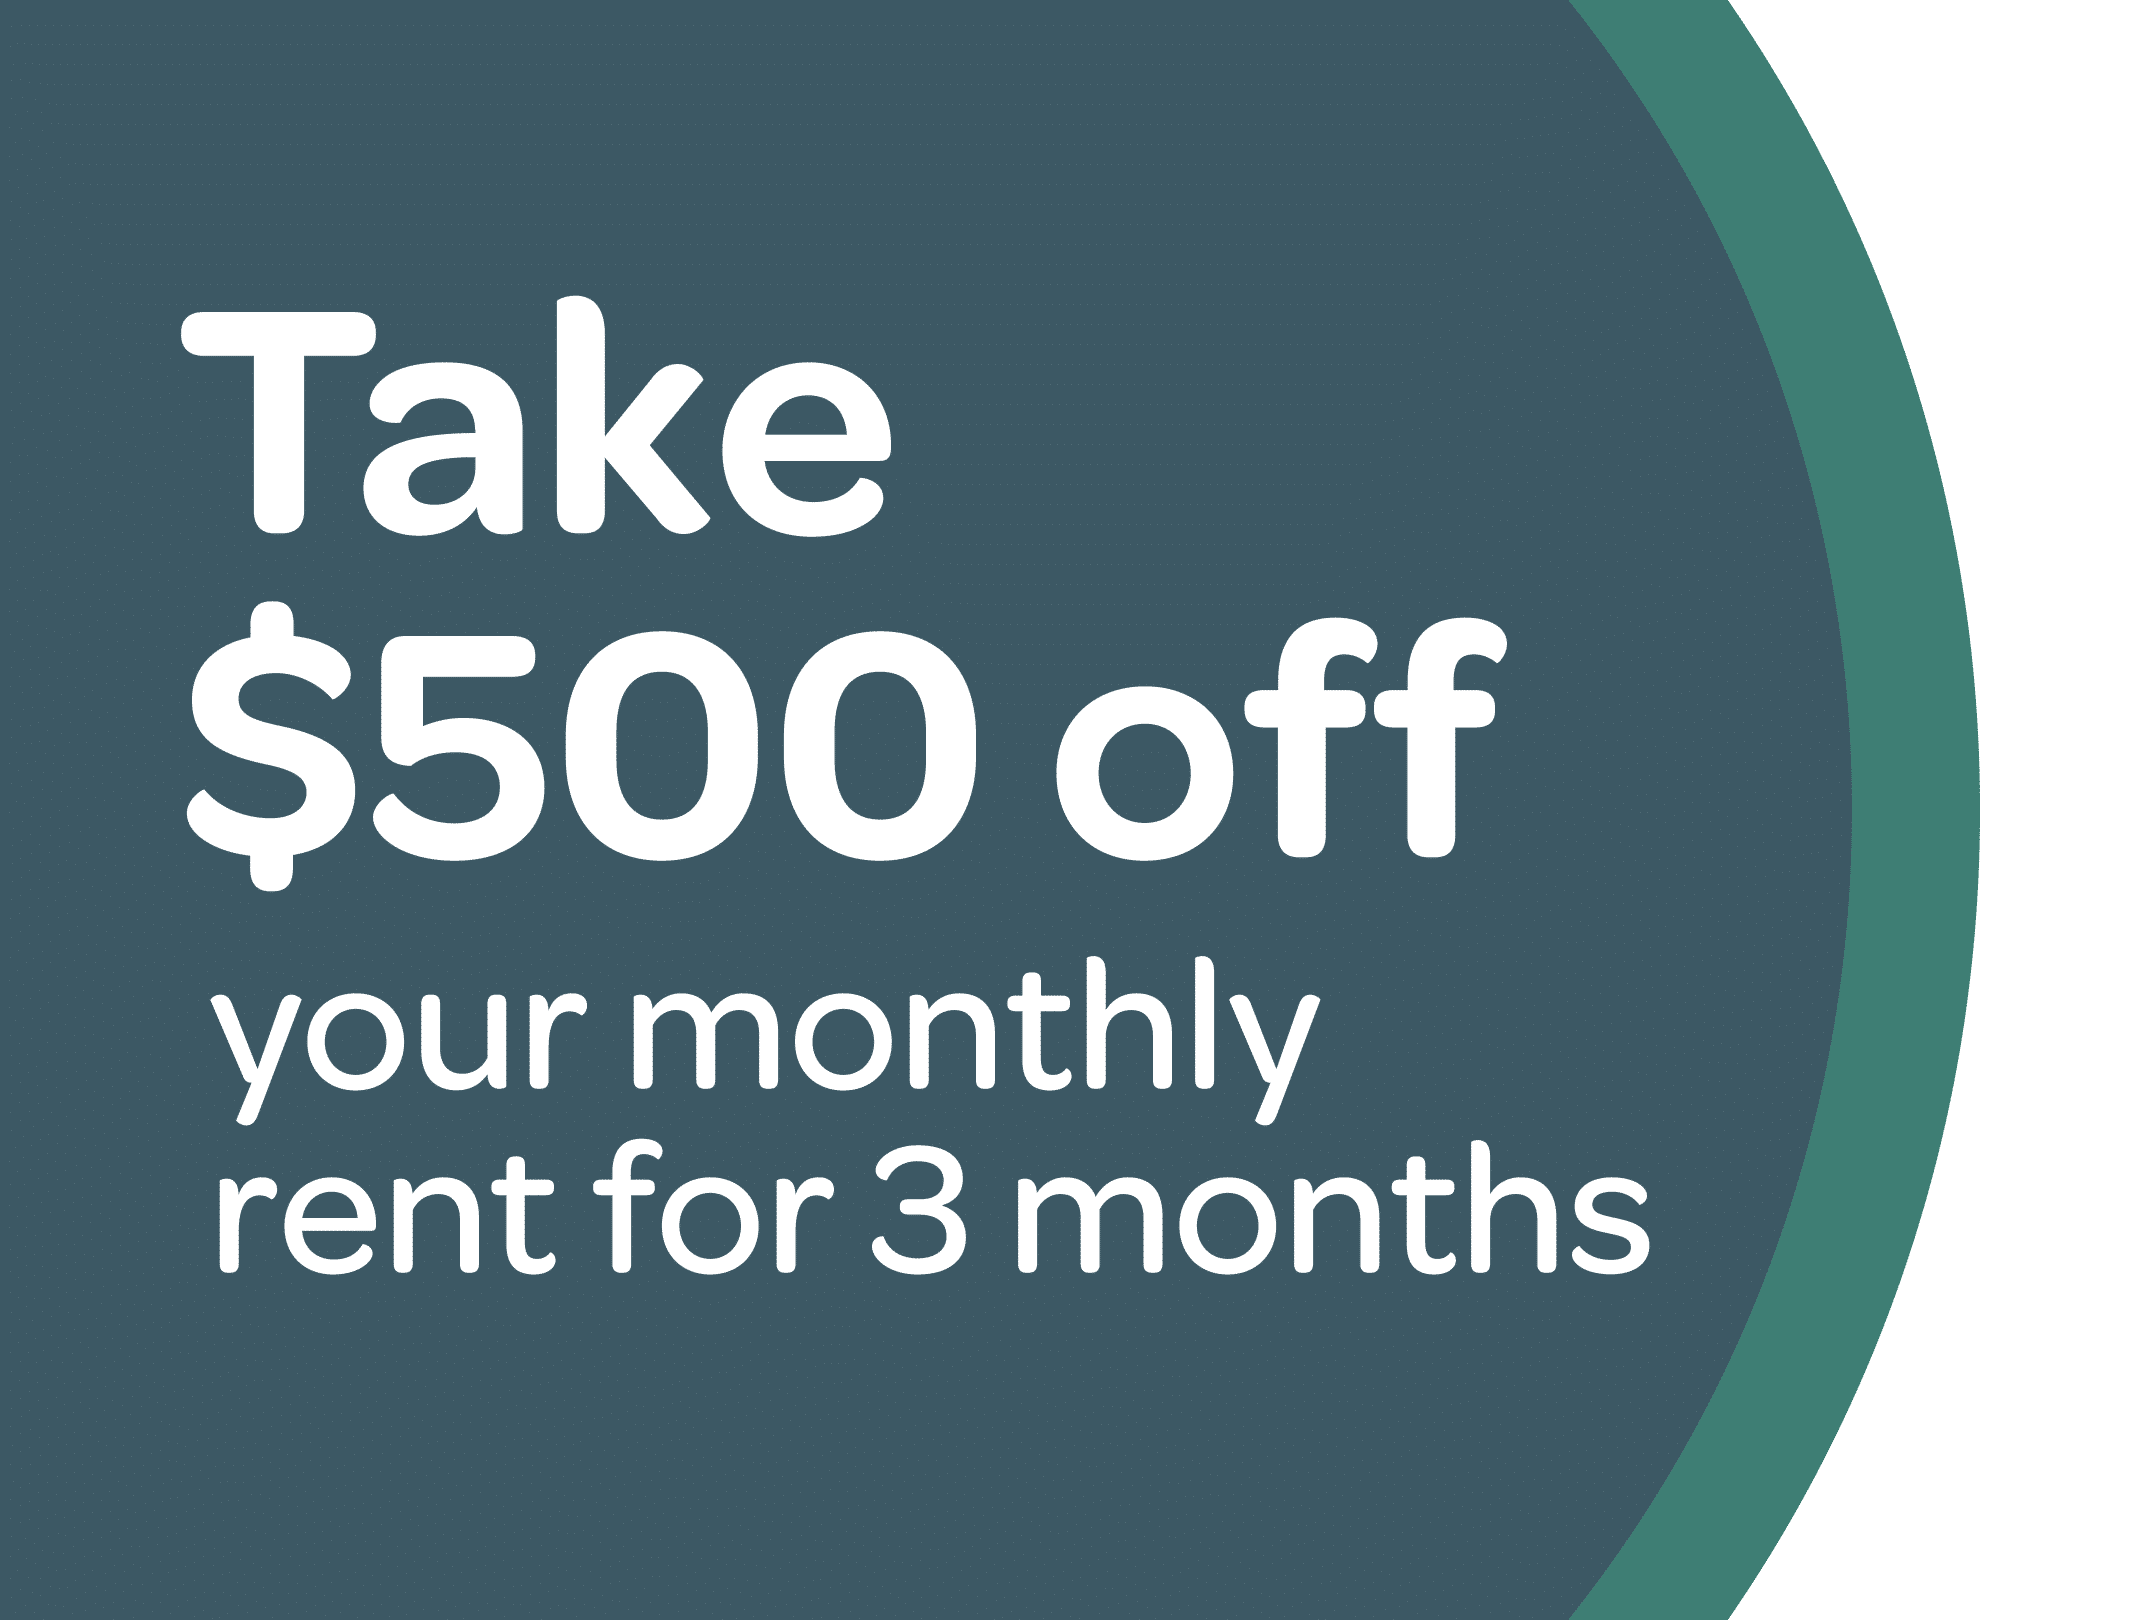 Take $500 off your monthly rent for 3 months